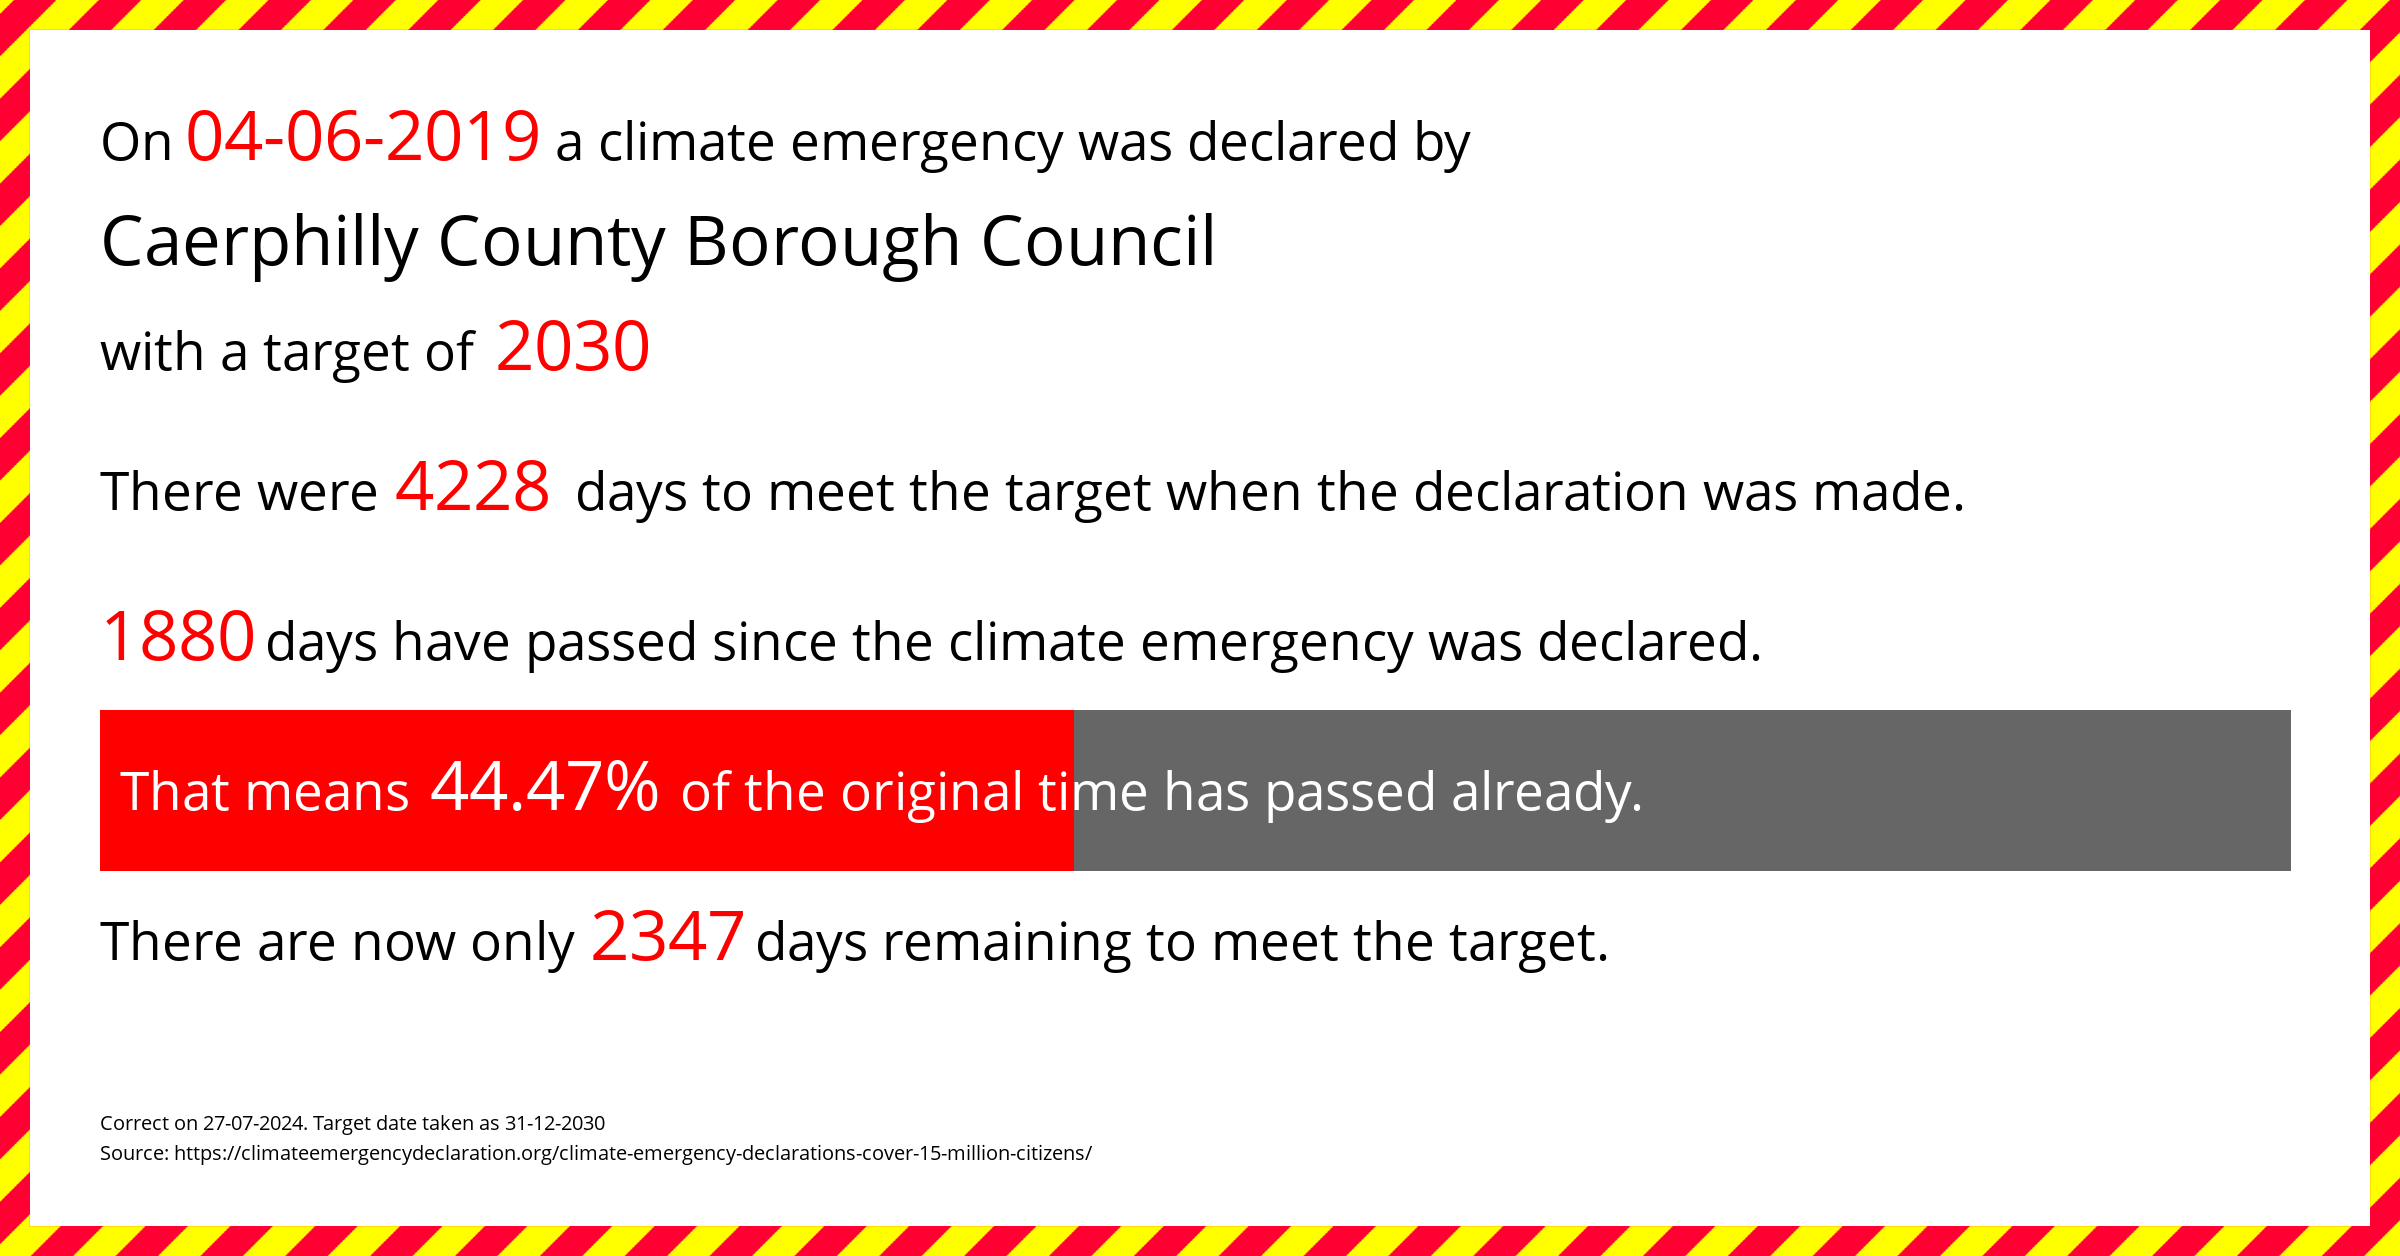 Caerphilly County Borough Council declared a Climate emergency on Tuesday 4th June 2019, with a target of 2030.